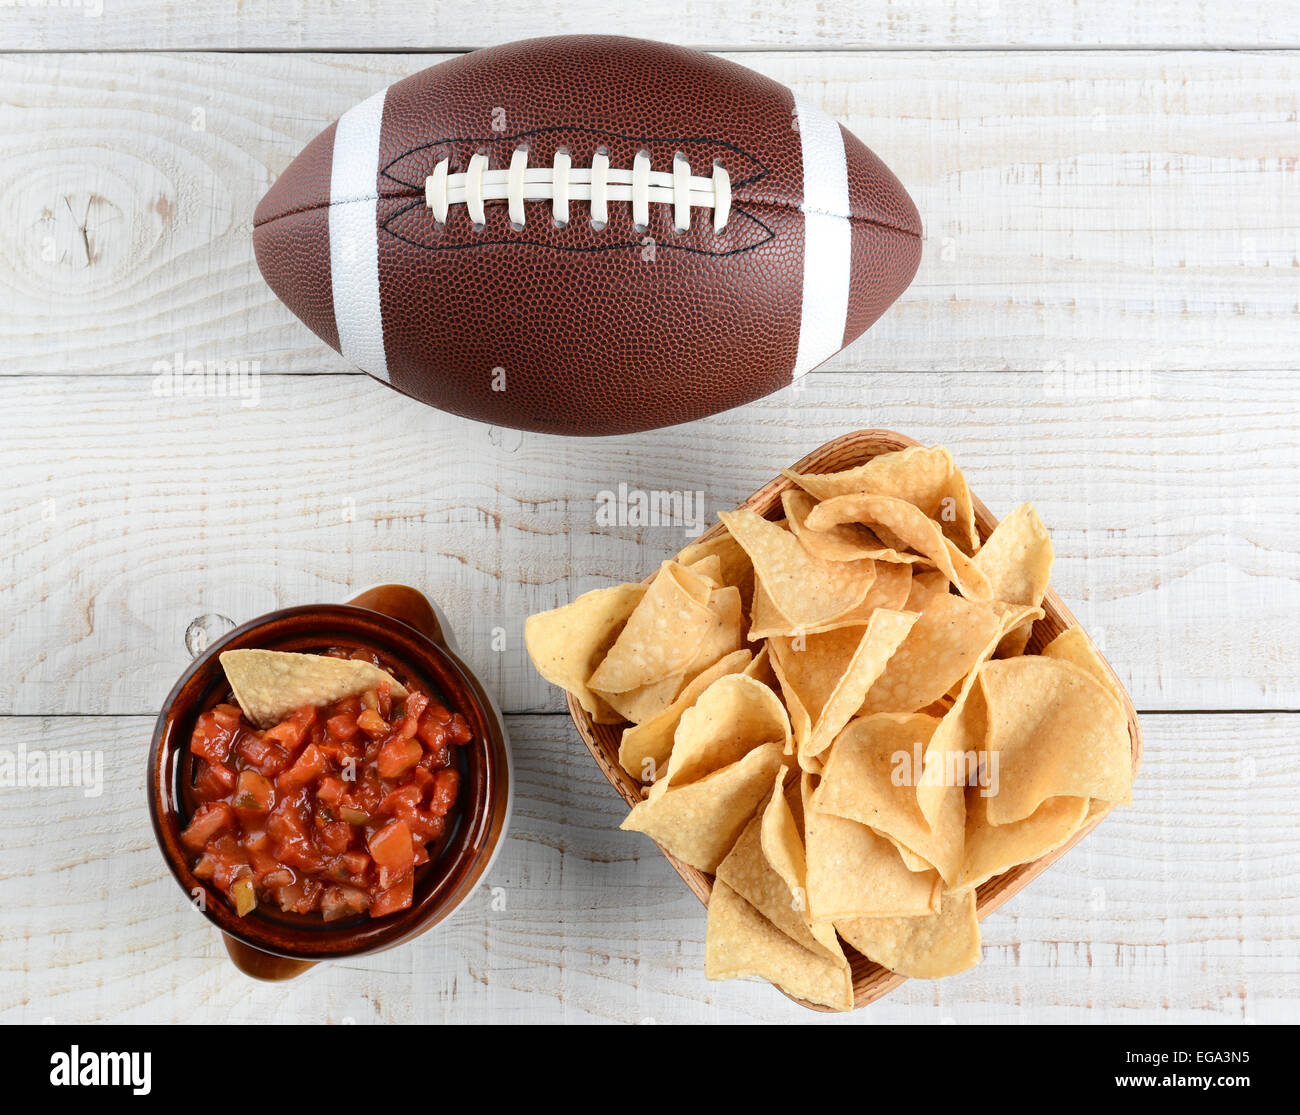 High angle shot of a bowl of corn chips a crock full of fresh salsa and an American football on a whitewashed rustic wood table. Stock Photo